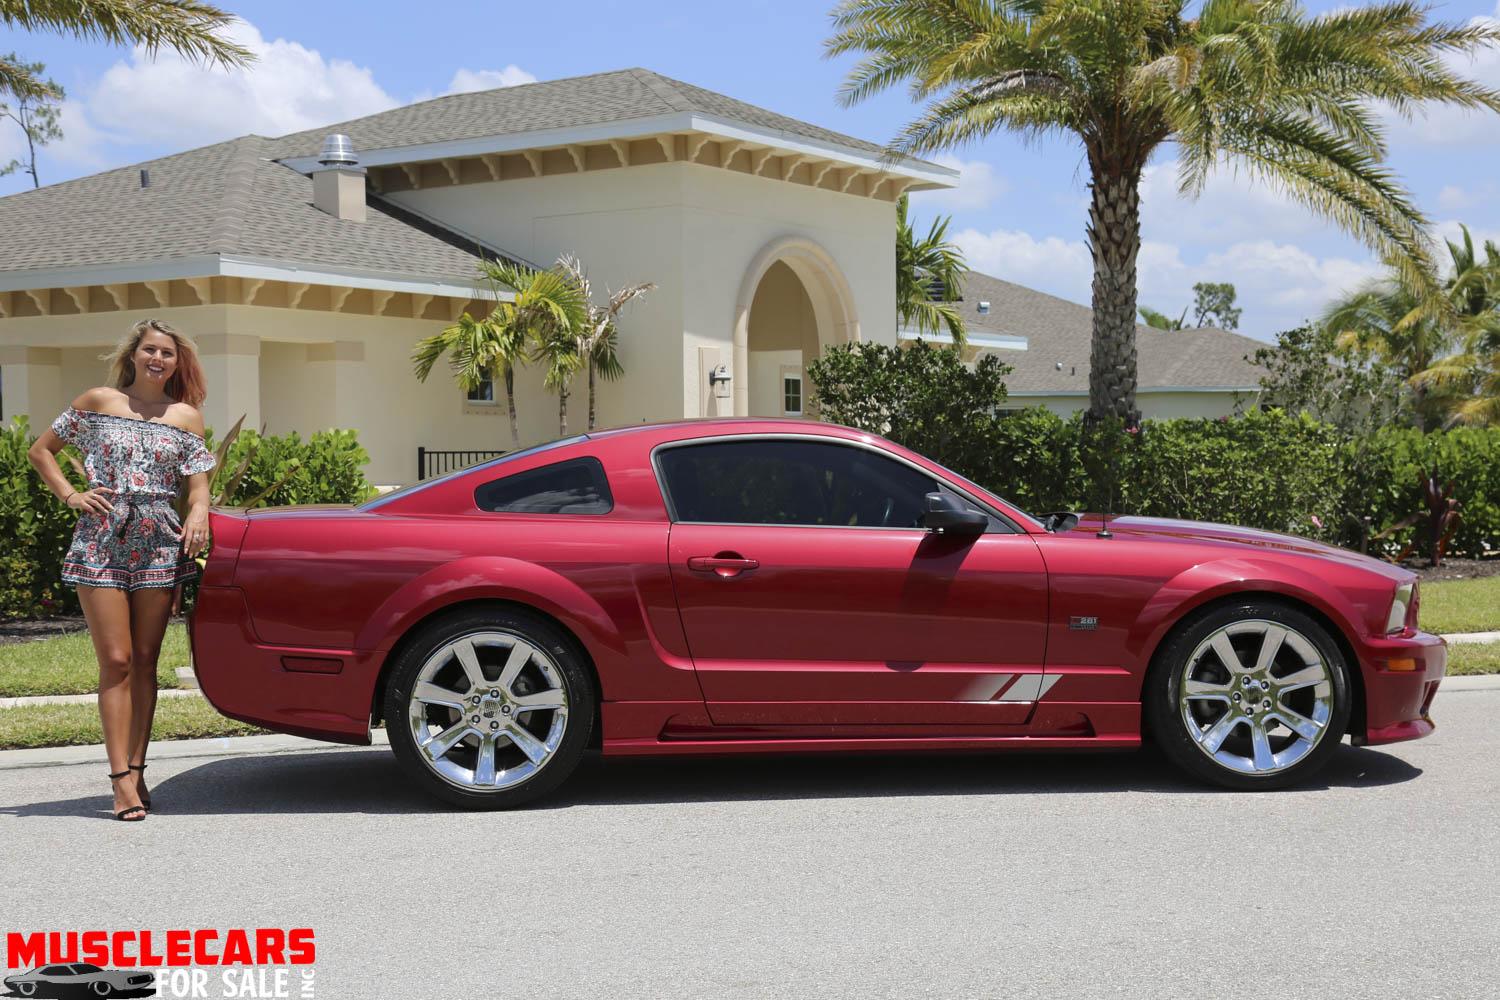 Used 2005 Ford Mustang Saleen Saleen for sale Sold at Muscle Cars for Sale Inc. in Fort Myers FL 33912 8